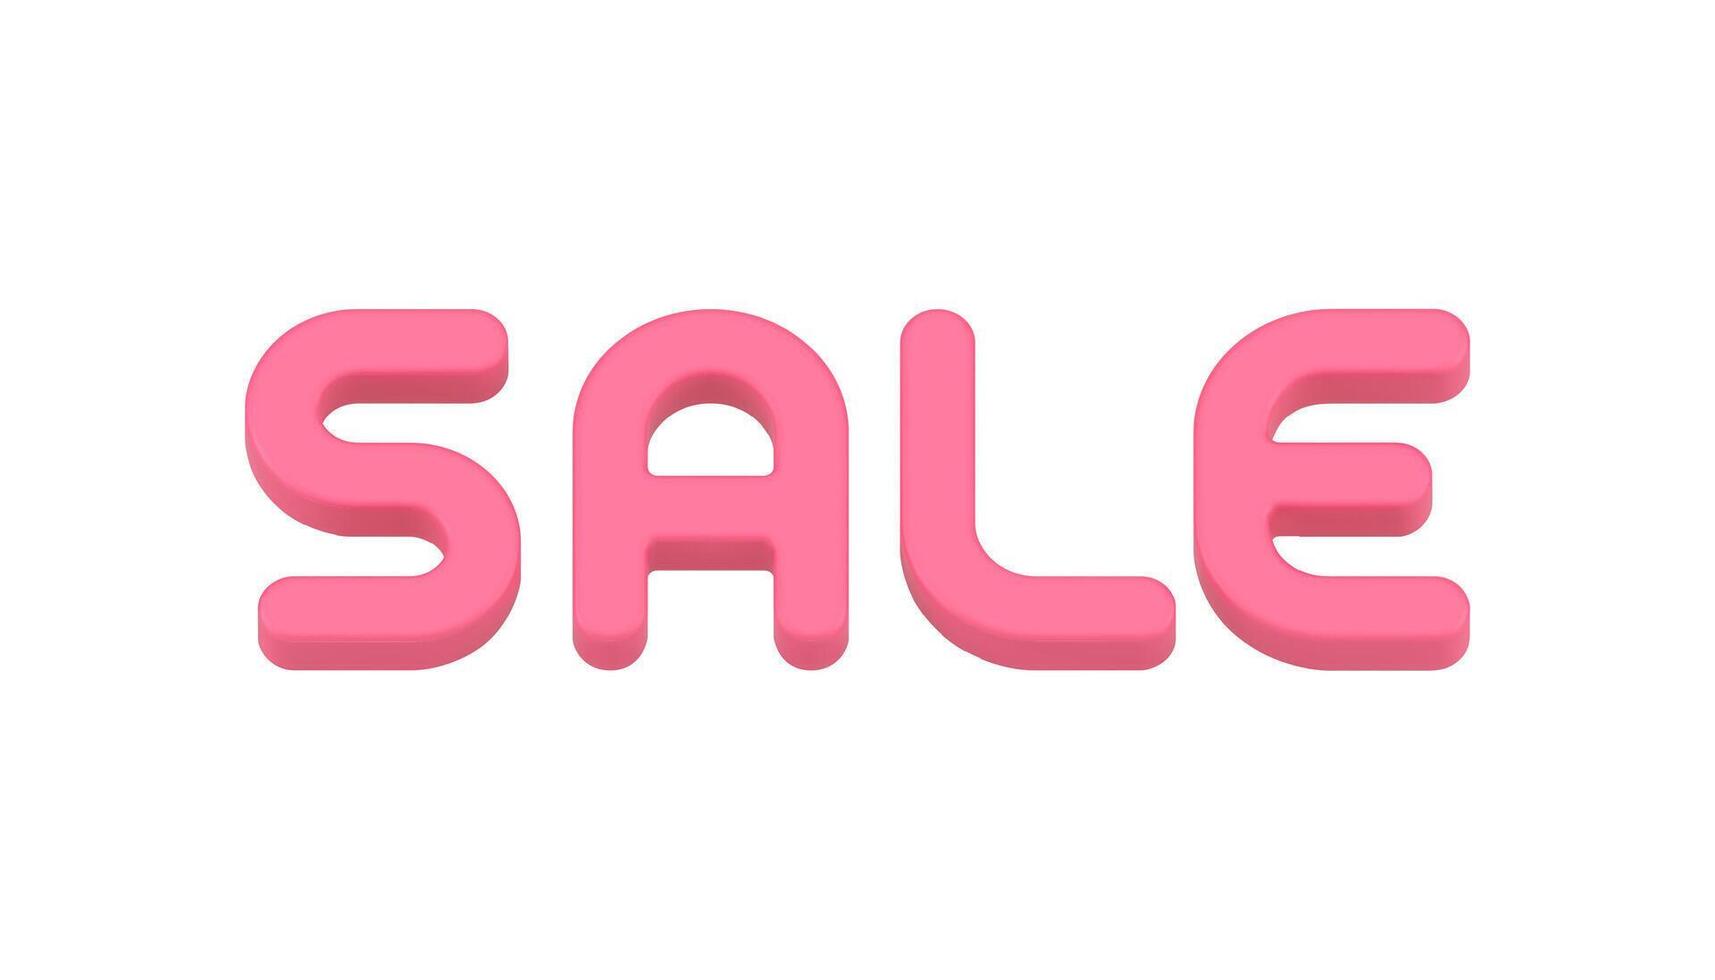 Decorative sale pink isometric diagonally placed realistic 3d icon shopping seasonal offer vector